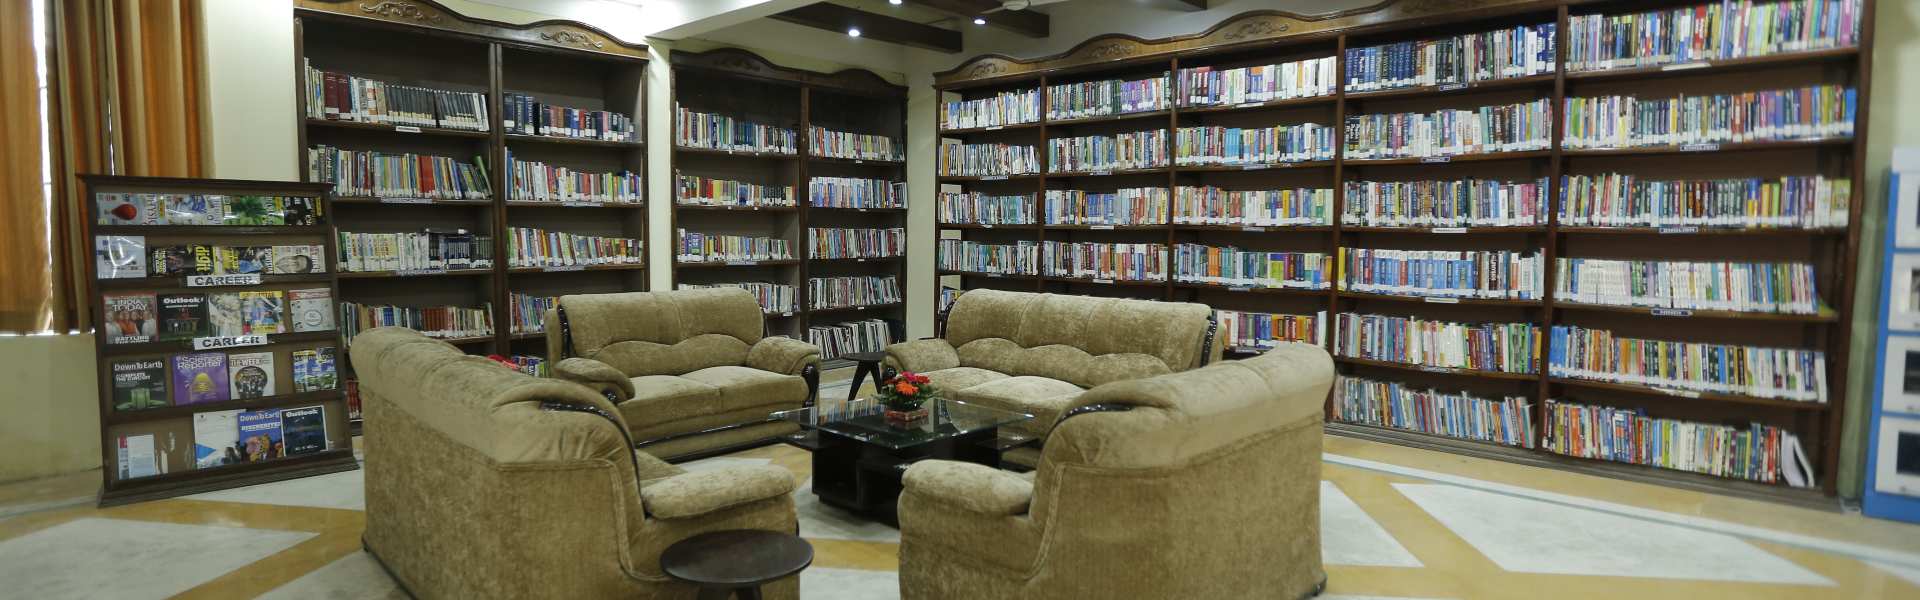 Library at the Asian School